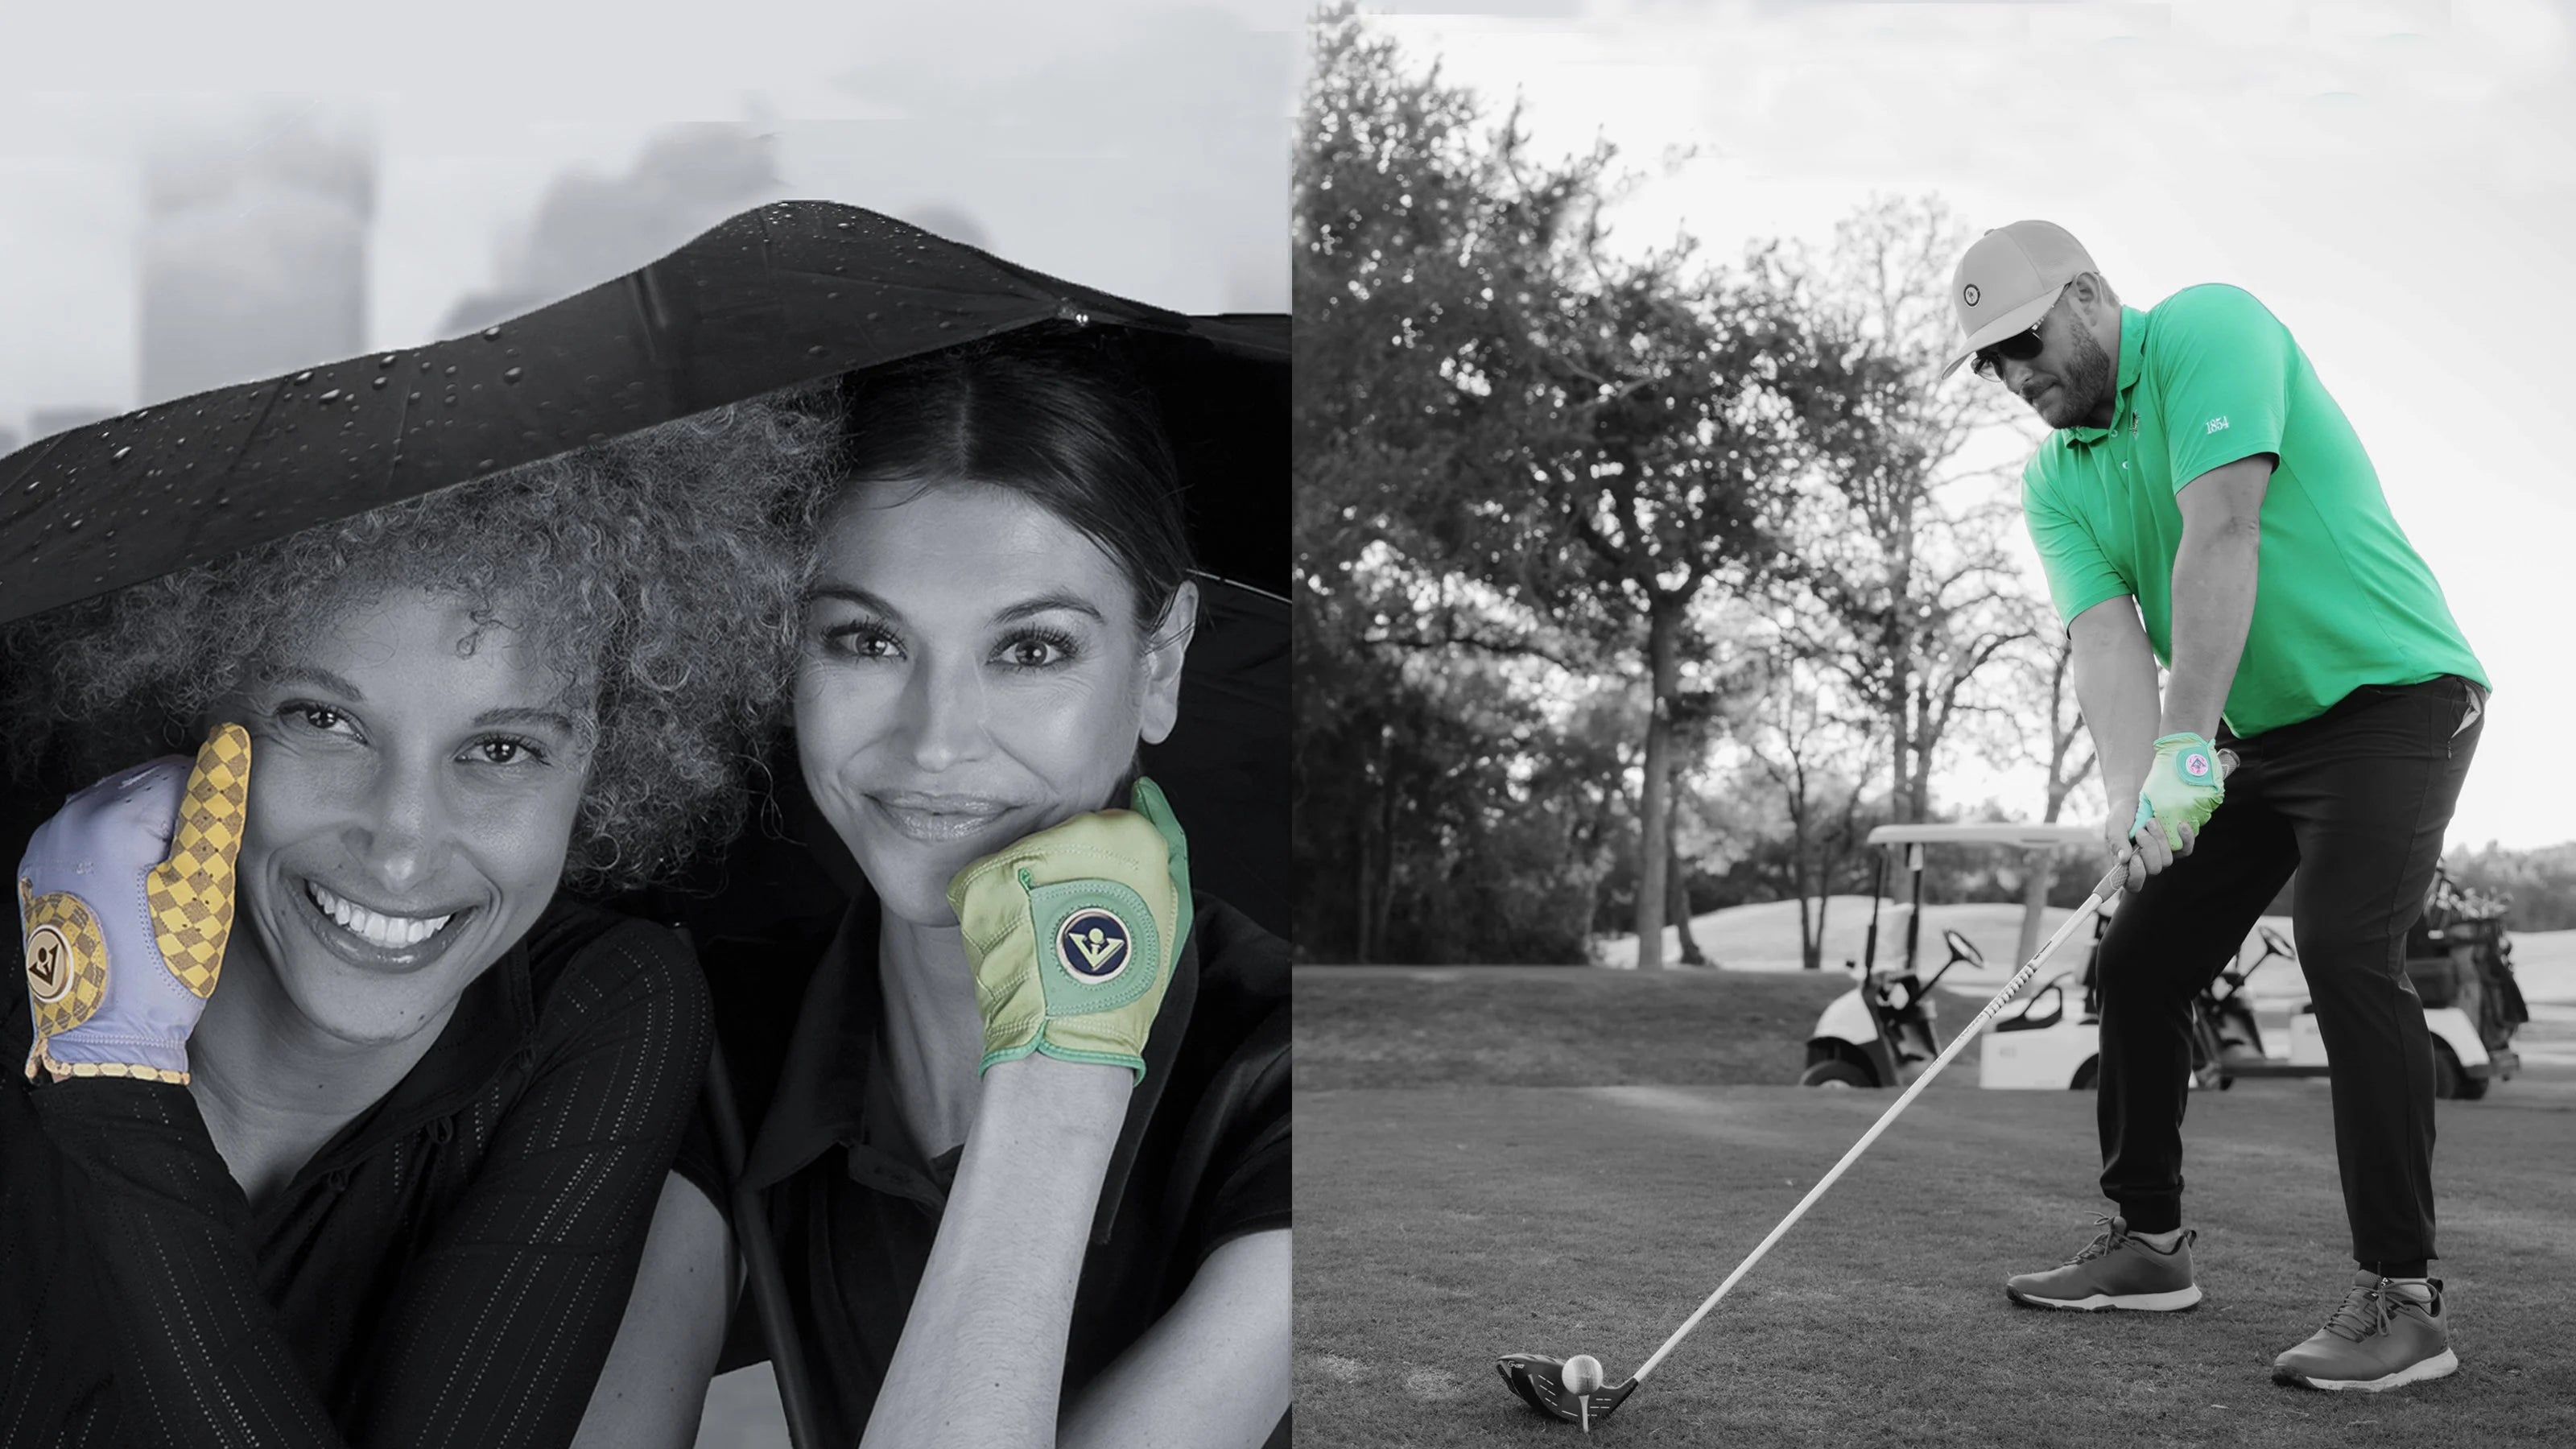 Two women under an umbrella wearing unique VivanTee golf gloves with ball markers; to the right, a man in a green shirt and matching golf glove prepares to tee off.